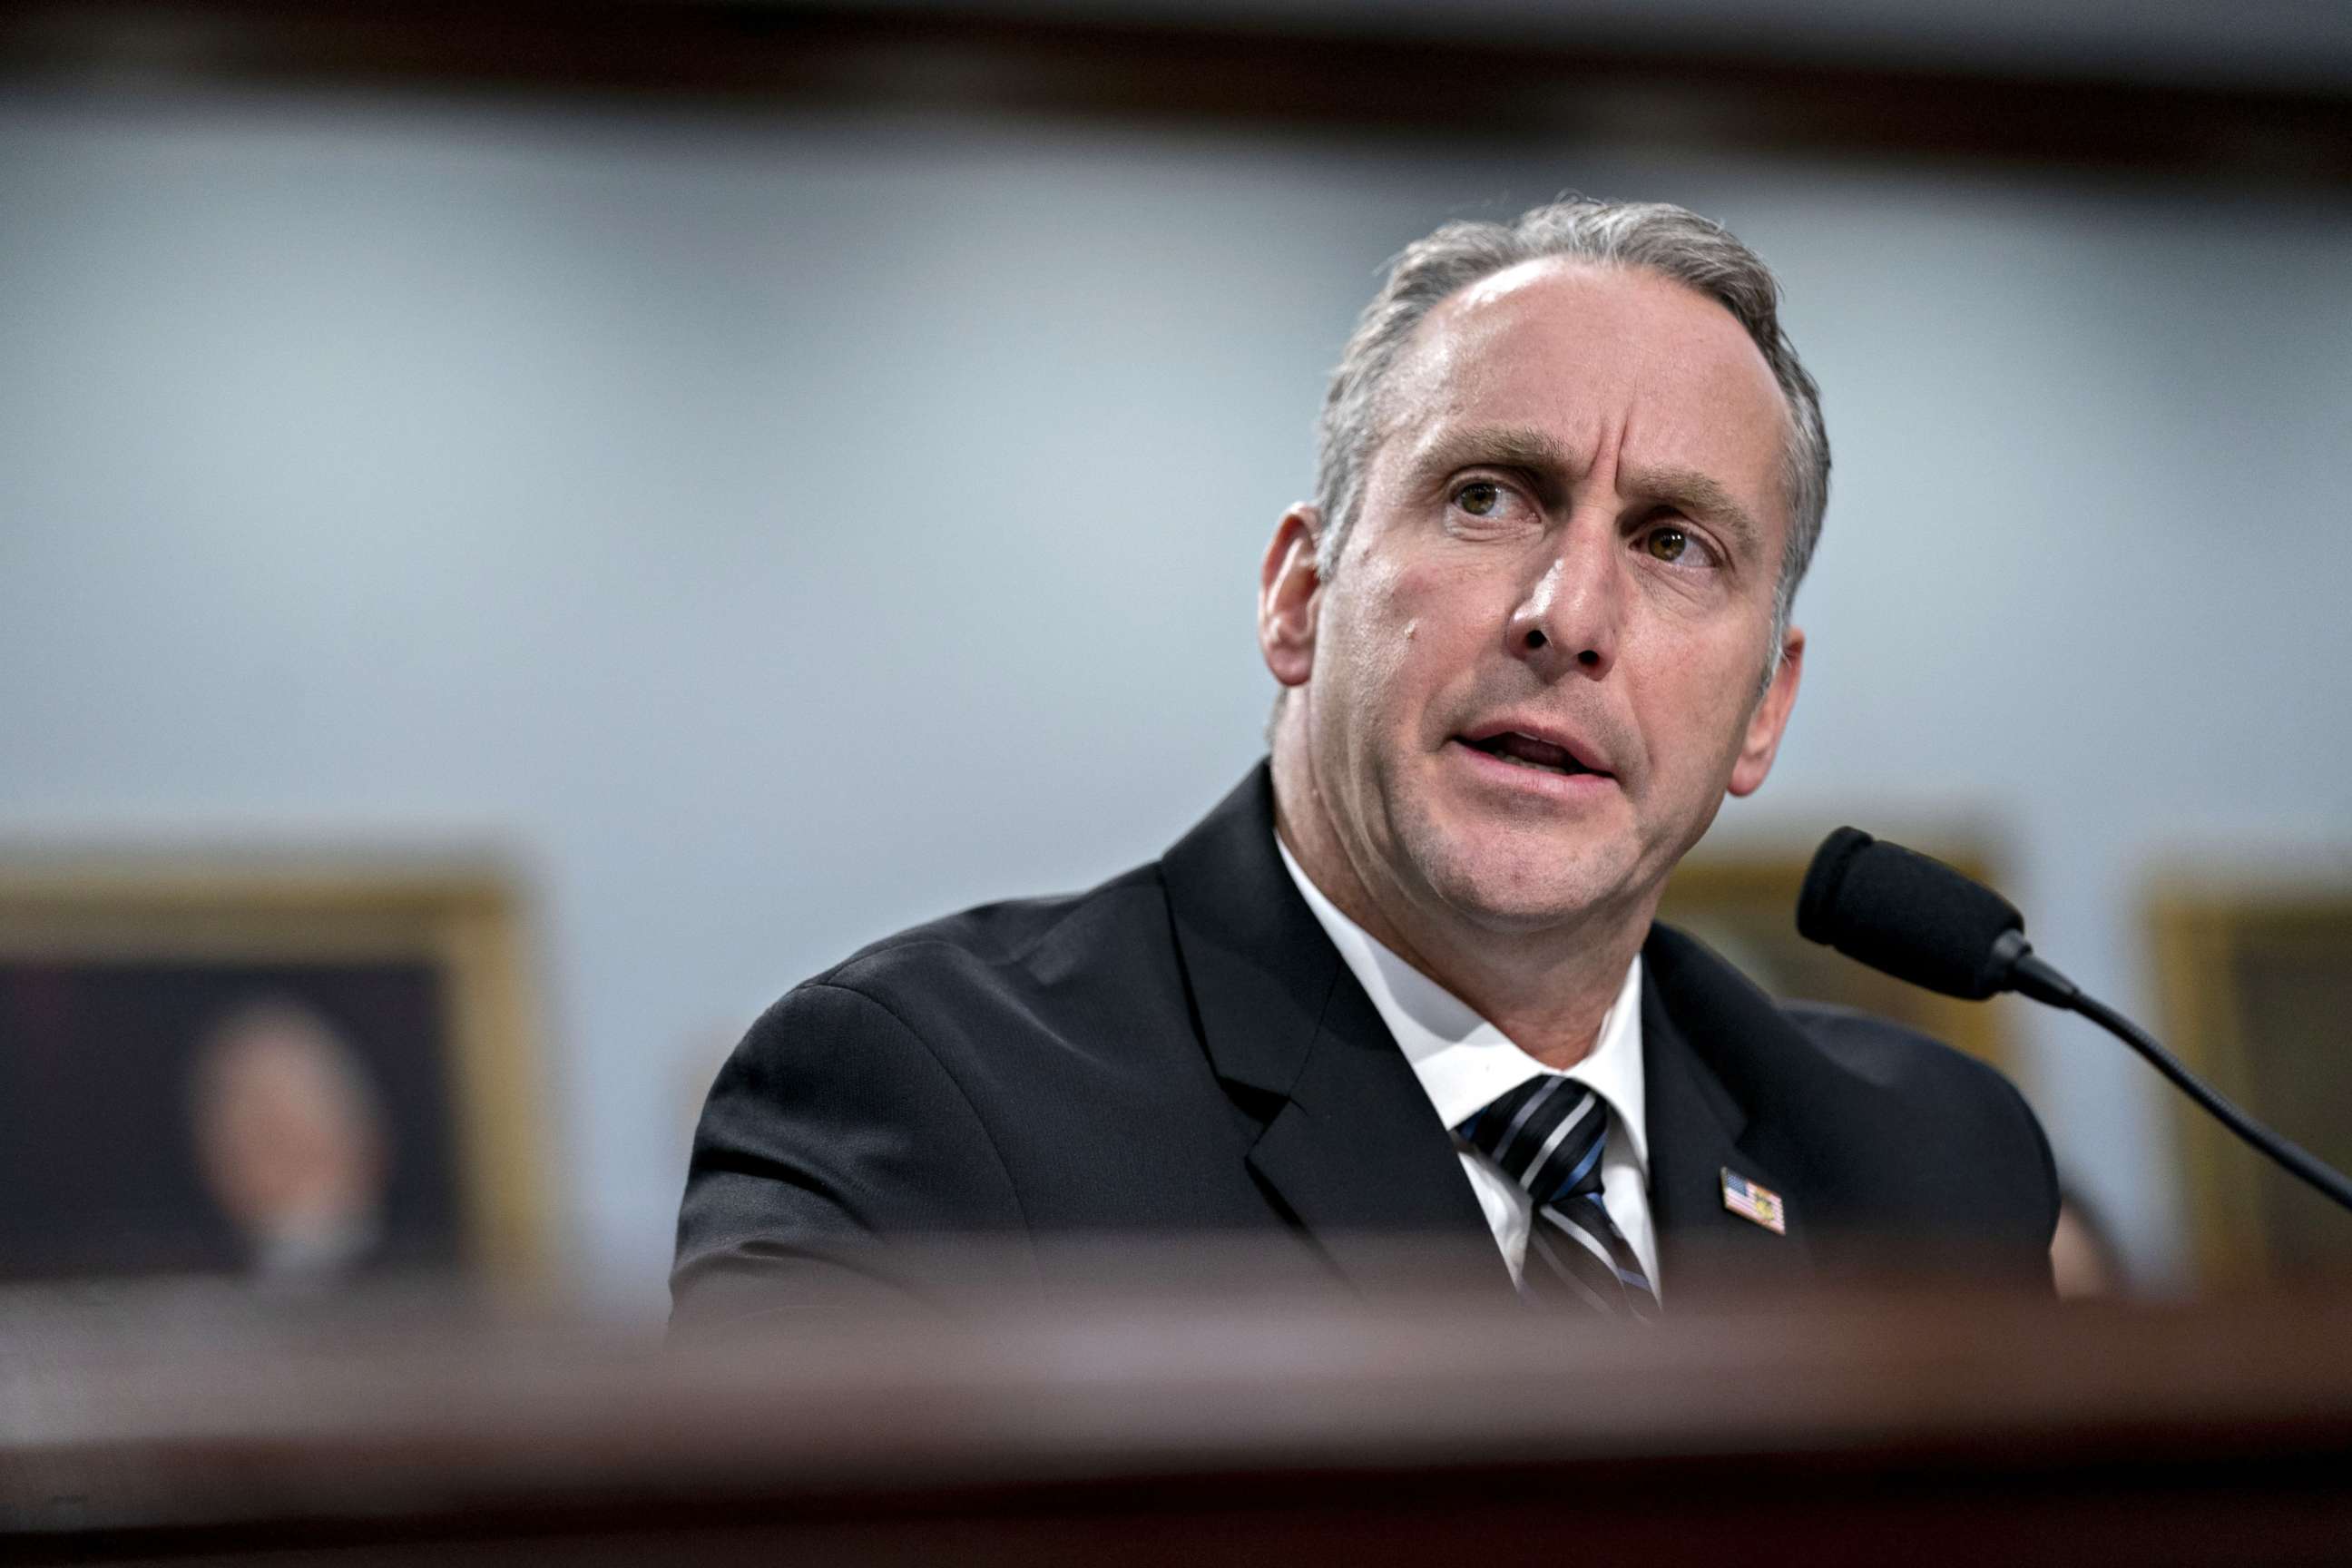 PHOTO: Matthew Albence, acting director of U.S. Immigration and Customs Enforcement (ICE), speaks during a House Appropriations Subcommittee on Homeland Security in Washington, D.C., July 25, 2019.